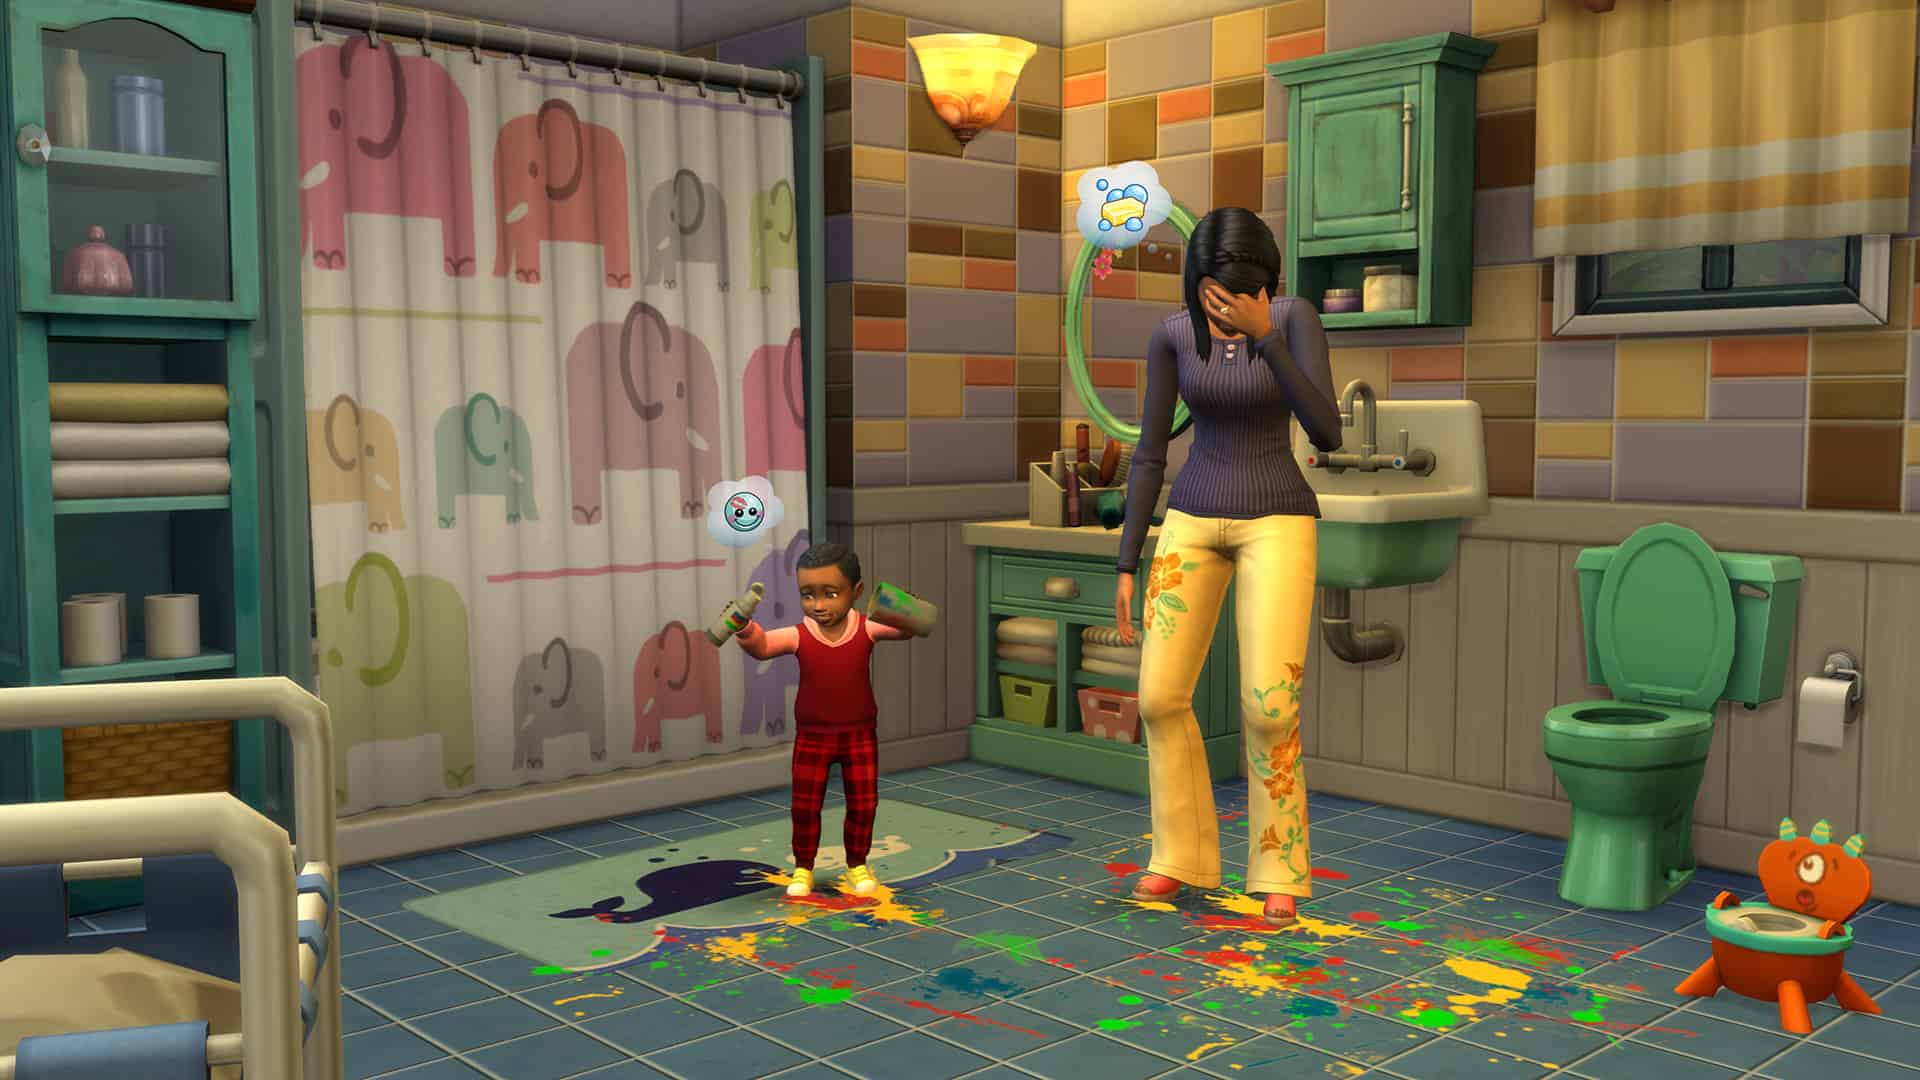 A Steam promotional image for The Sims 4: Parenthood.